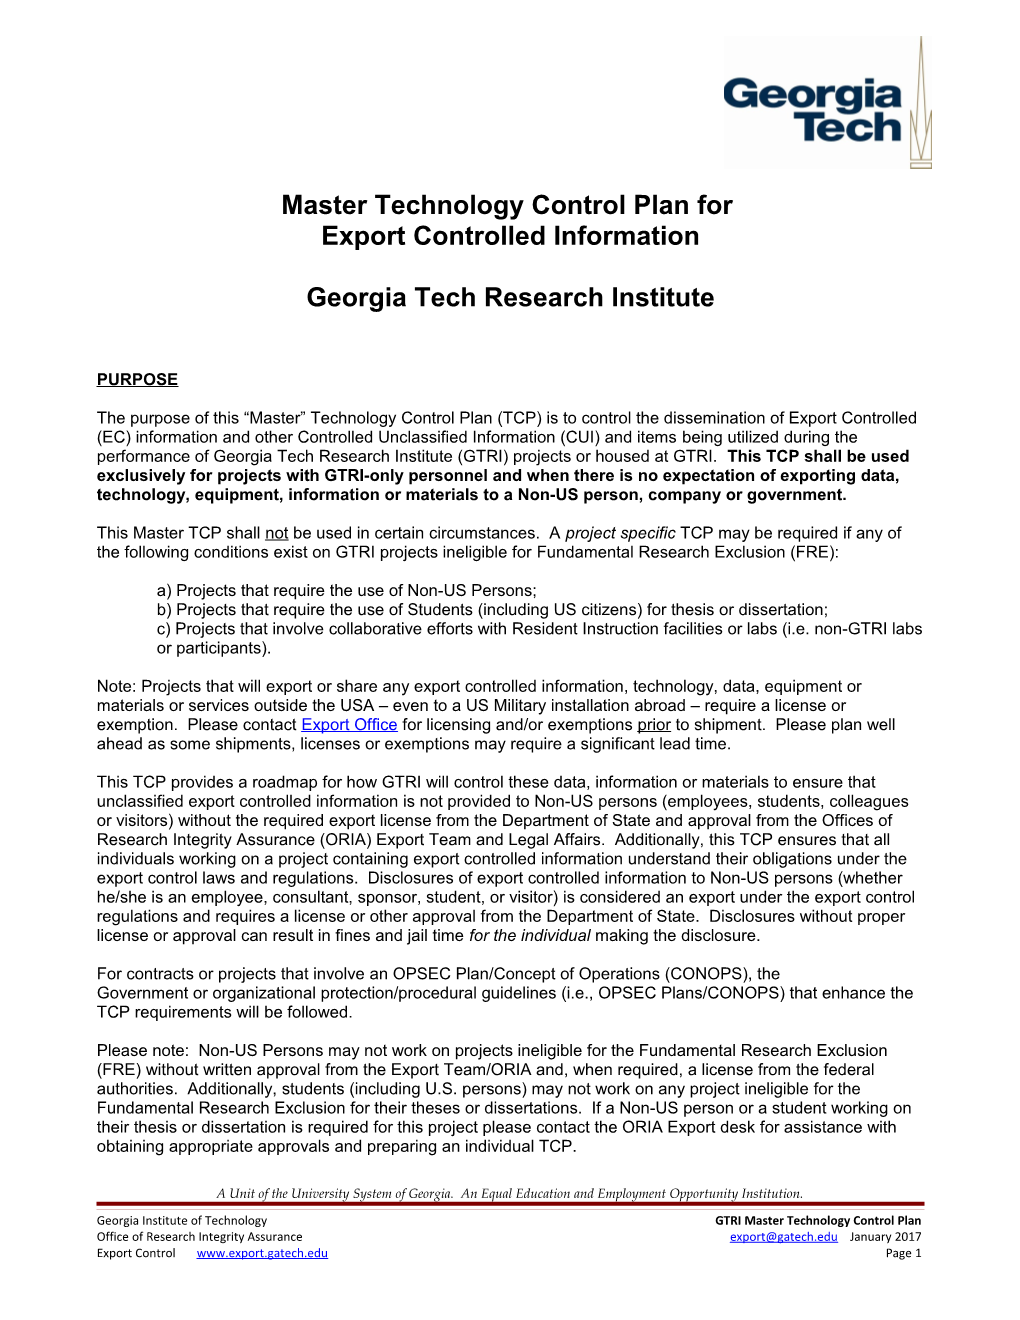 Master Technology Control Plan For